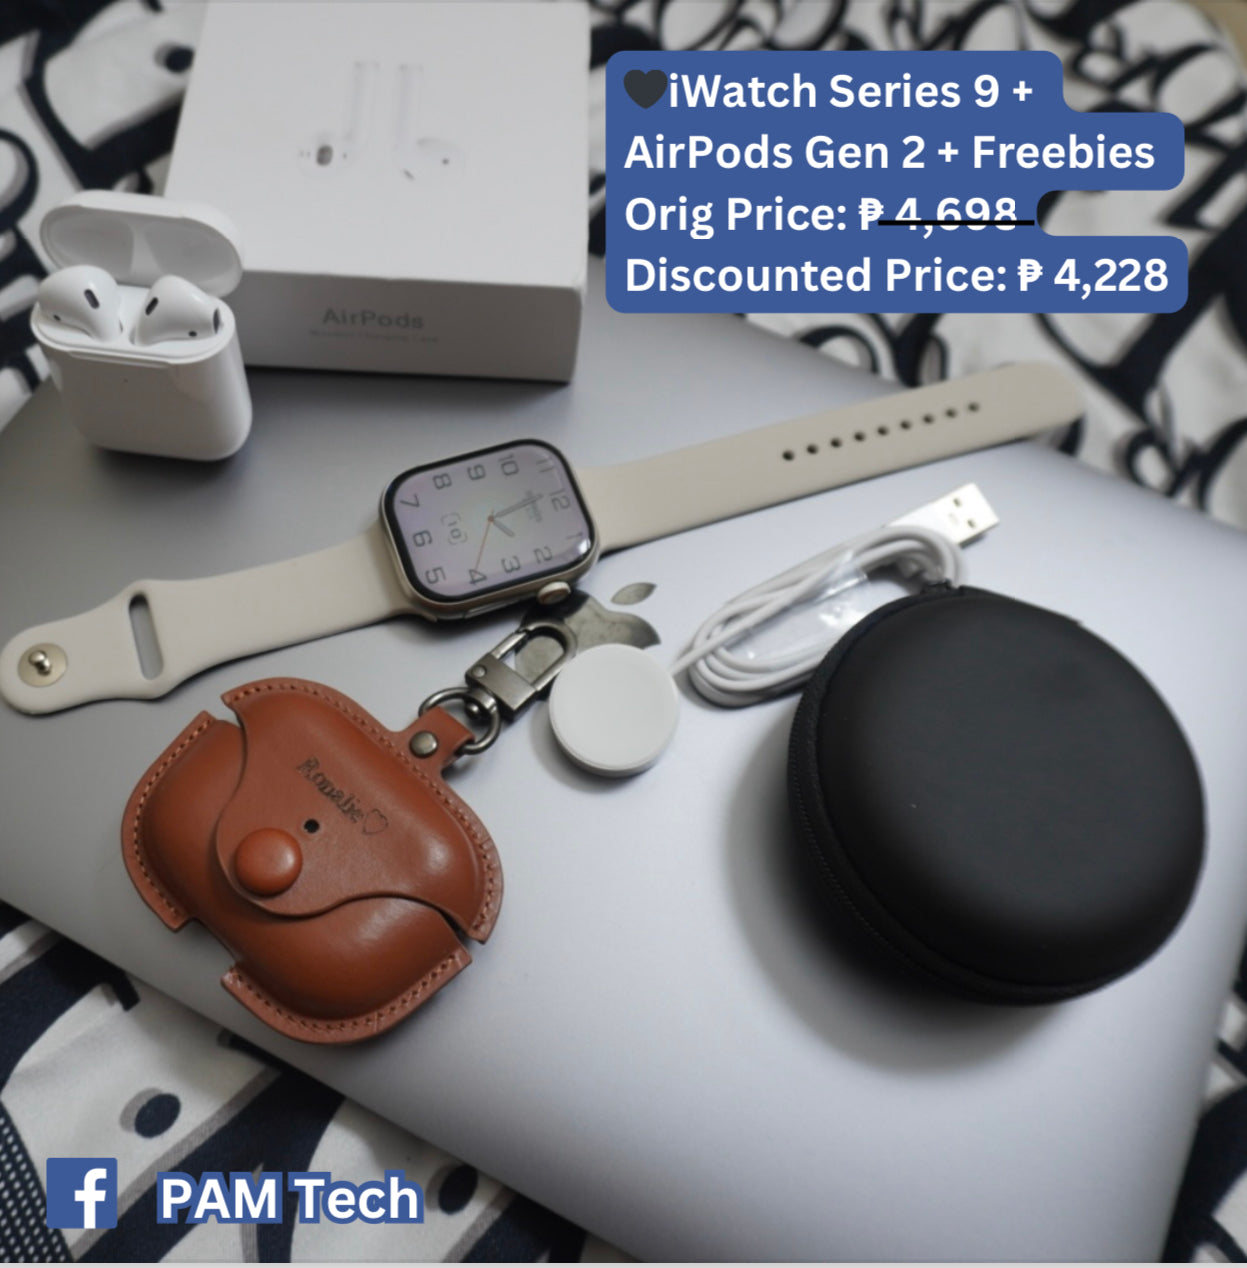 Bundle Promo (Iwatch + AirPods)